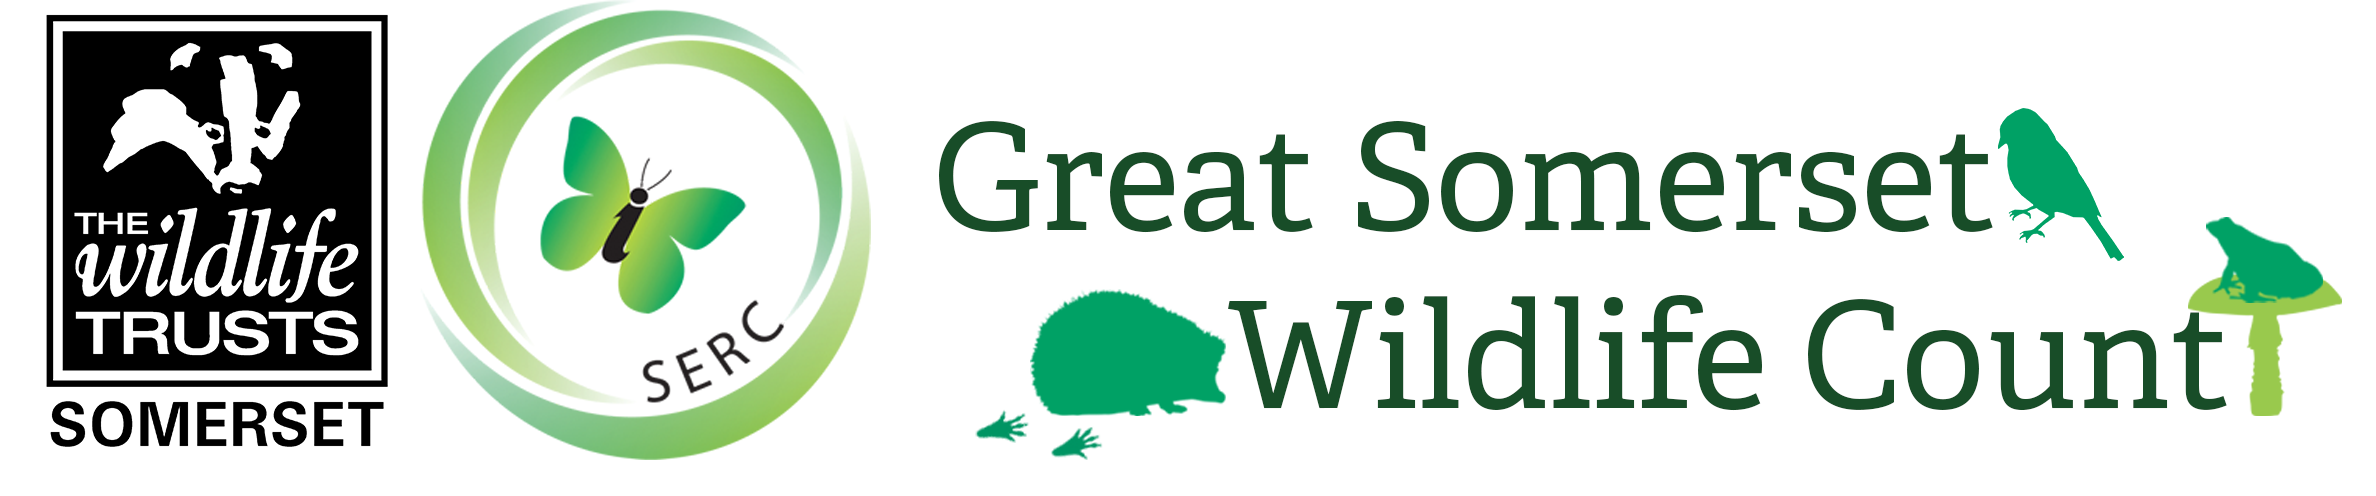 Great somerset wildlife count logo - Somerset Environmental Records Centre